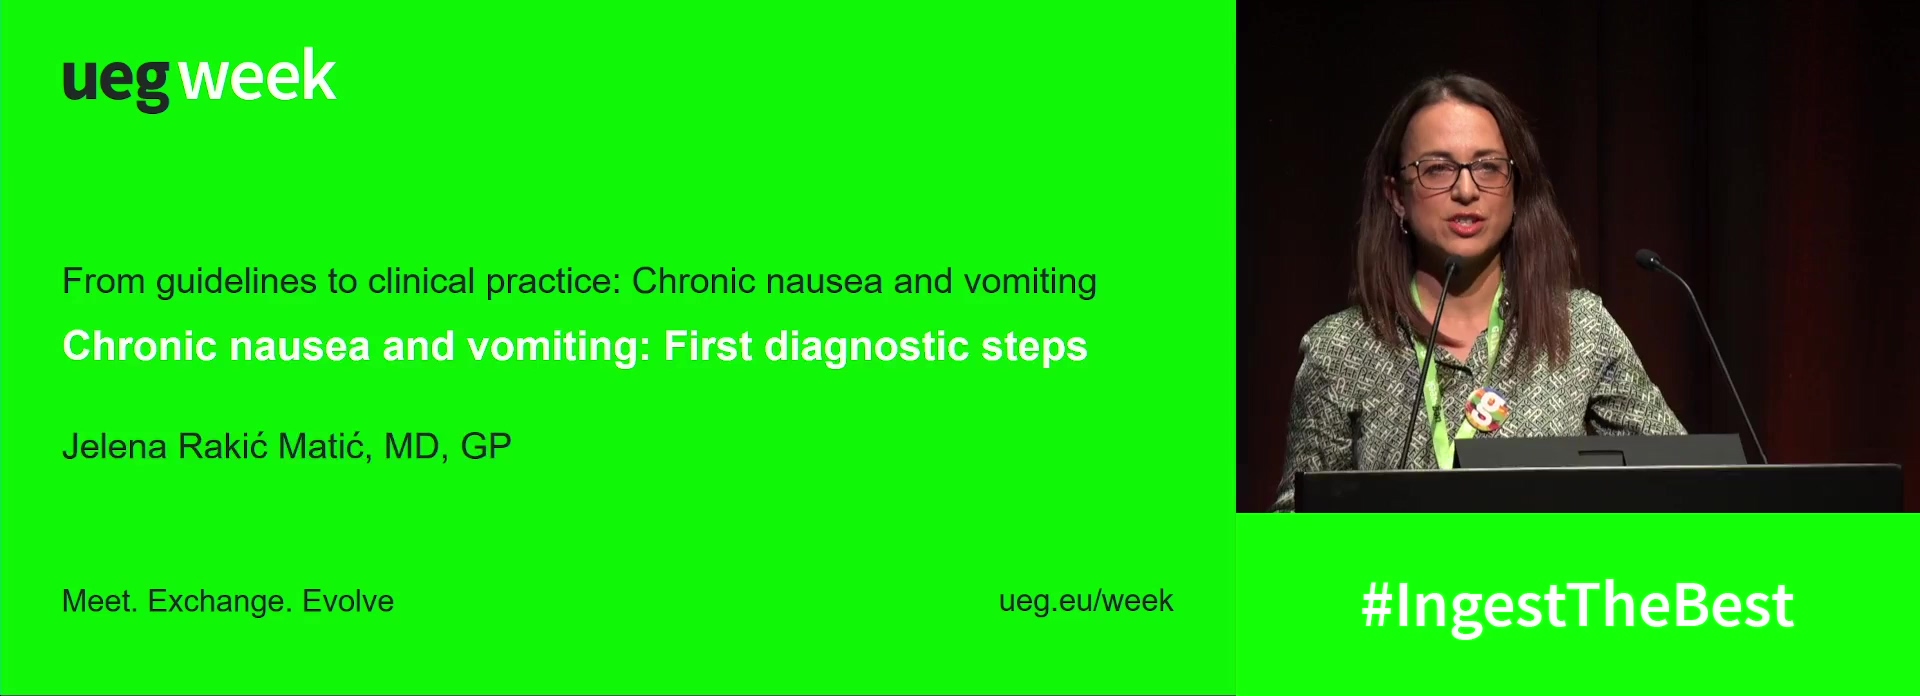 Chronic nausea and vomiting: First diagnostic steps